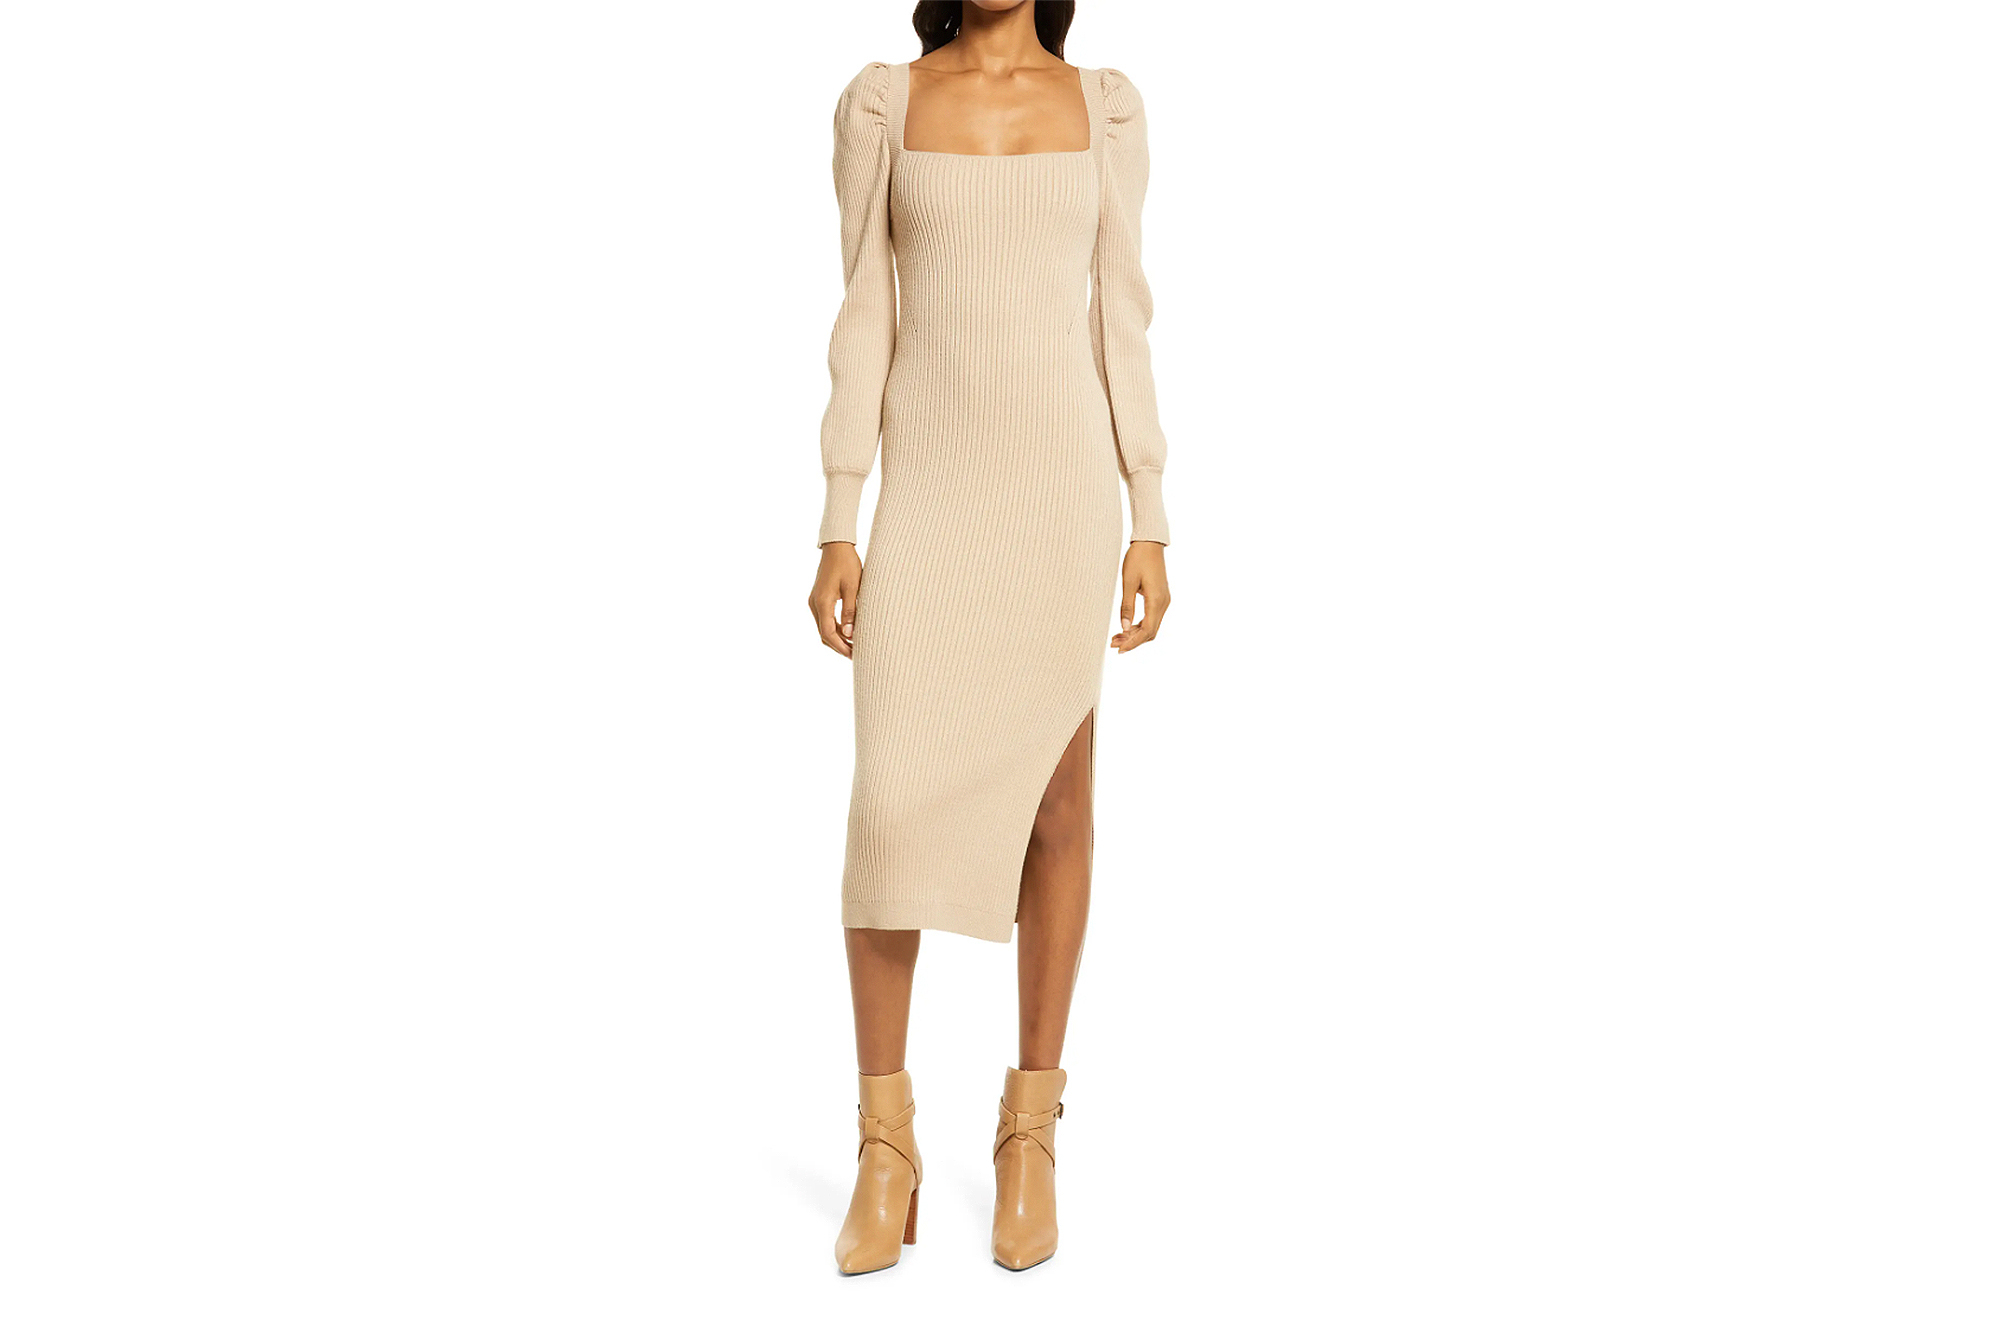 Charles Henry Sweater Dress Is a Stunner According to Shoppers